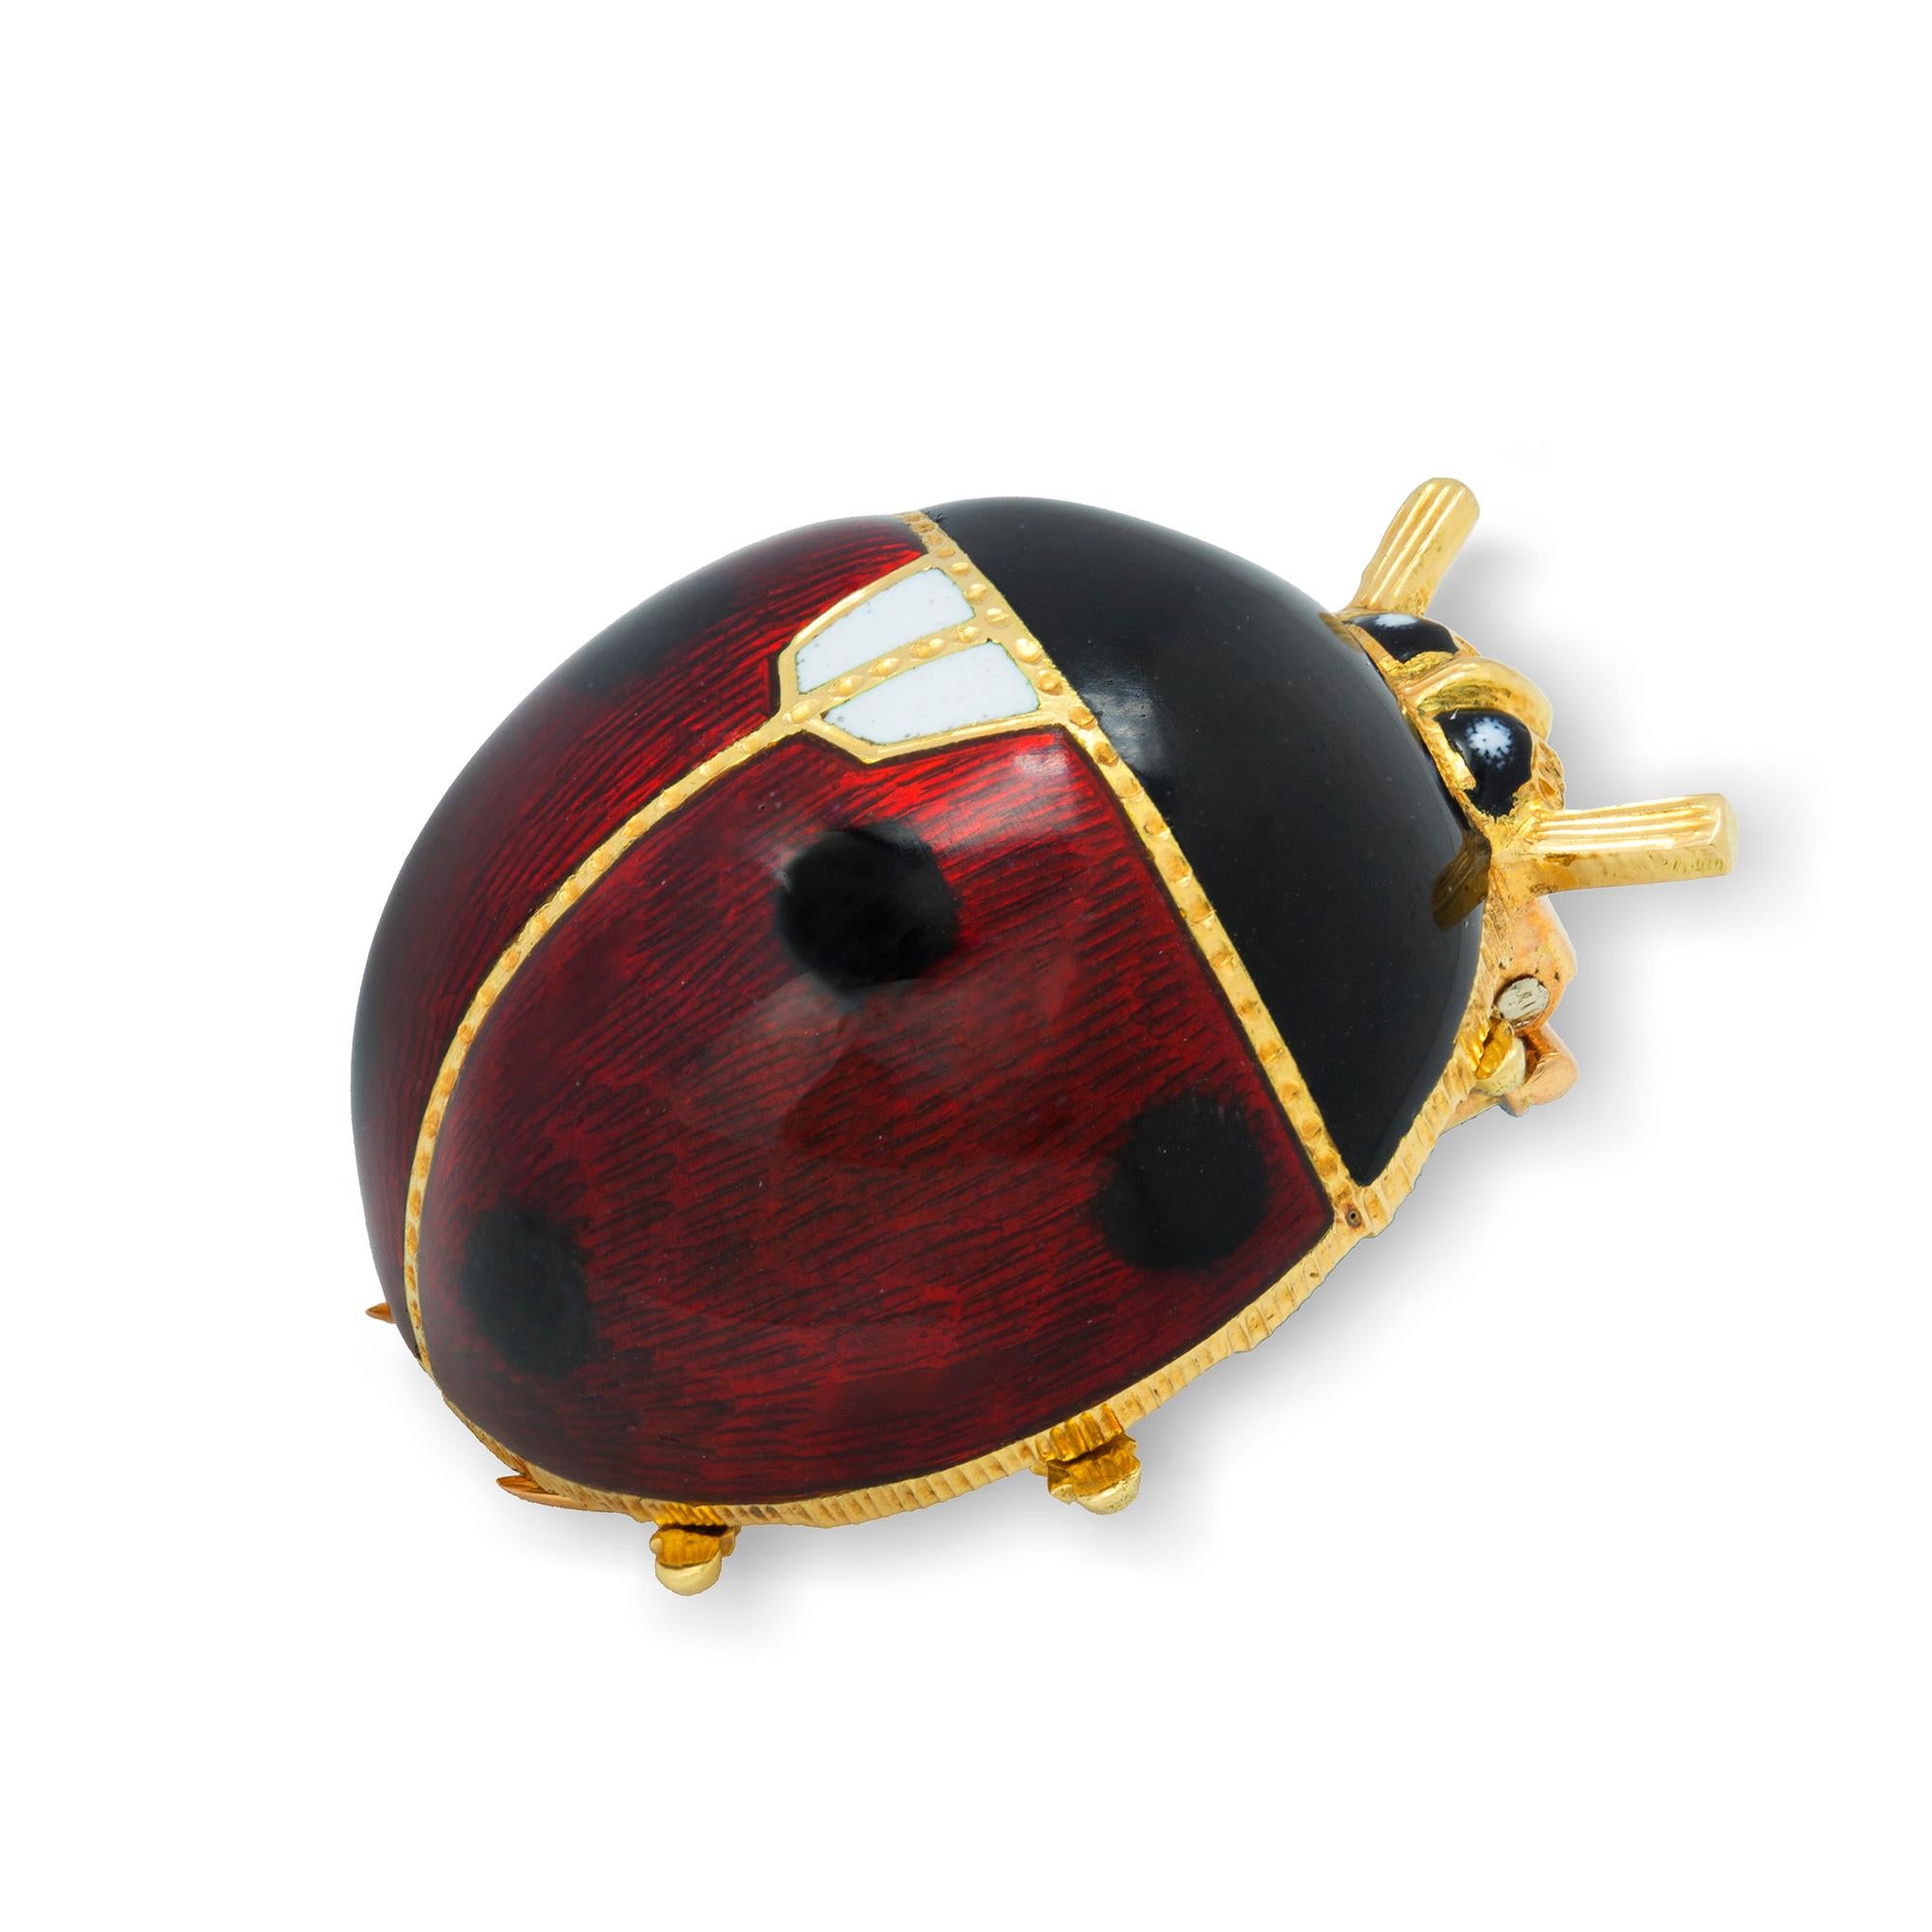 A guilloché enamel ladybird brooch, the red, black and white enamelled body, all to a yellow gold mount with pin brooch fitting, marked 18ct gold, Italy, circa 1960s, measuring approximately 2.7 cm in diameter, gross weight 18.00 grams.

Ladybird